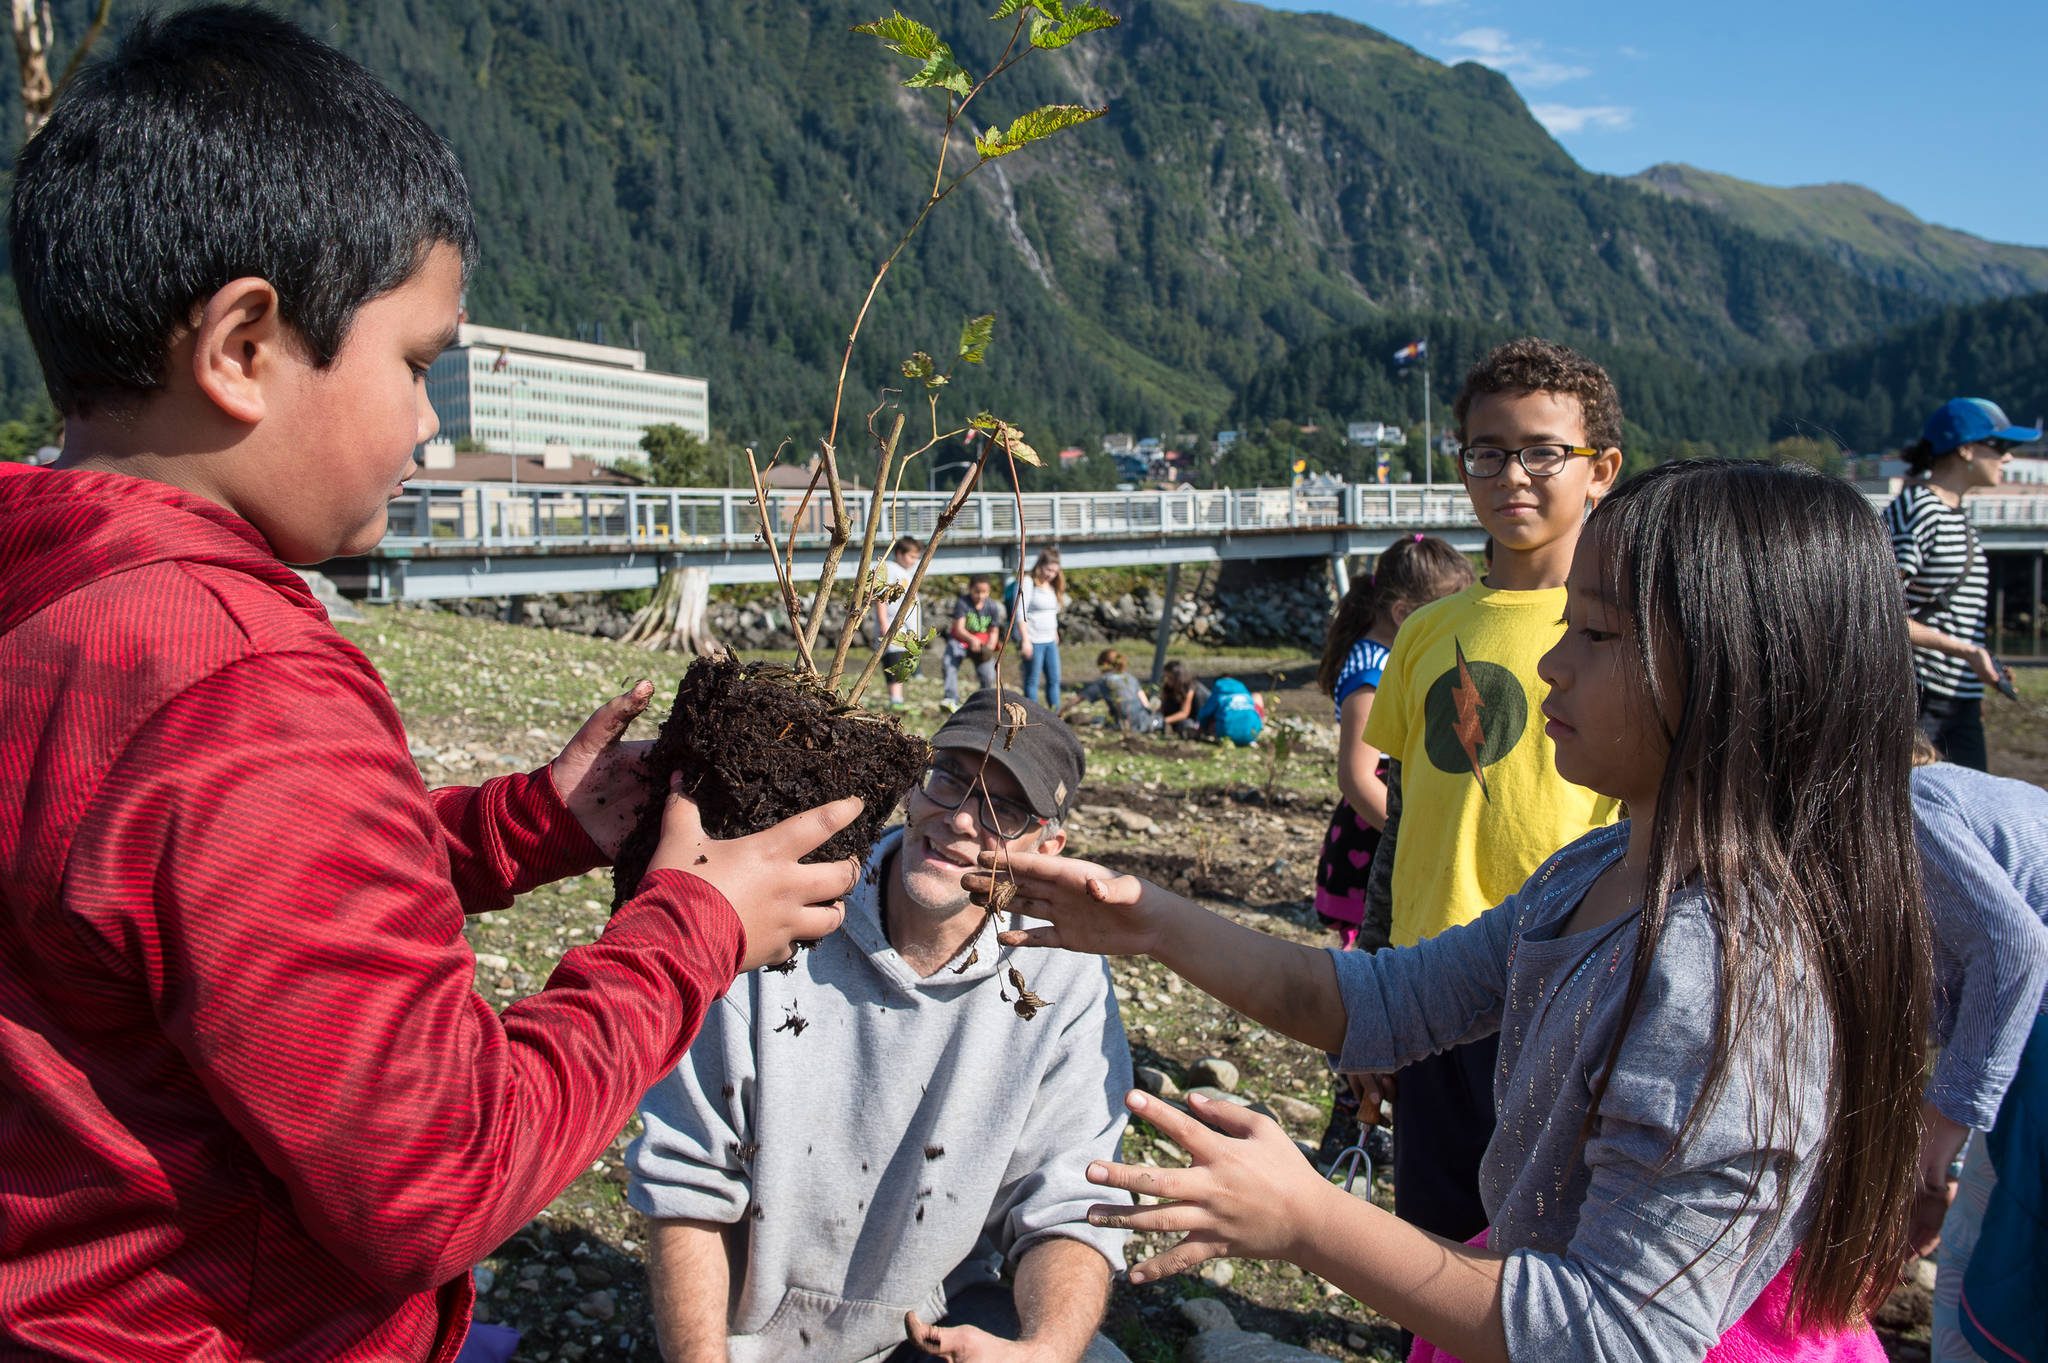 Ben Patterson, the city’s landscape maintenance supervisor, watches as fourth-grade students Jamal Canon, left, and Emery Marte from Harborview Elementary School plant salmonberries on a newly created island next to the Seawalk on Tuesday, Sept. 5, 2017. Harborview students will get a chance to plant 300 native species on the island over the next week to transform the area into habitat for birds. (Michael Penn | Juneau Empire)